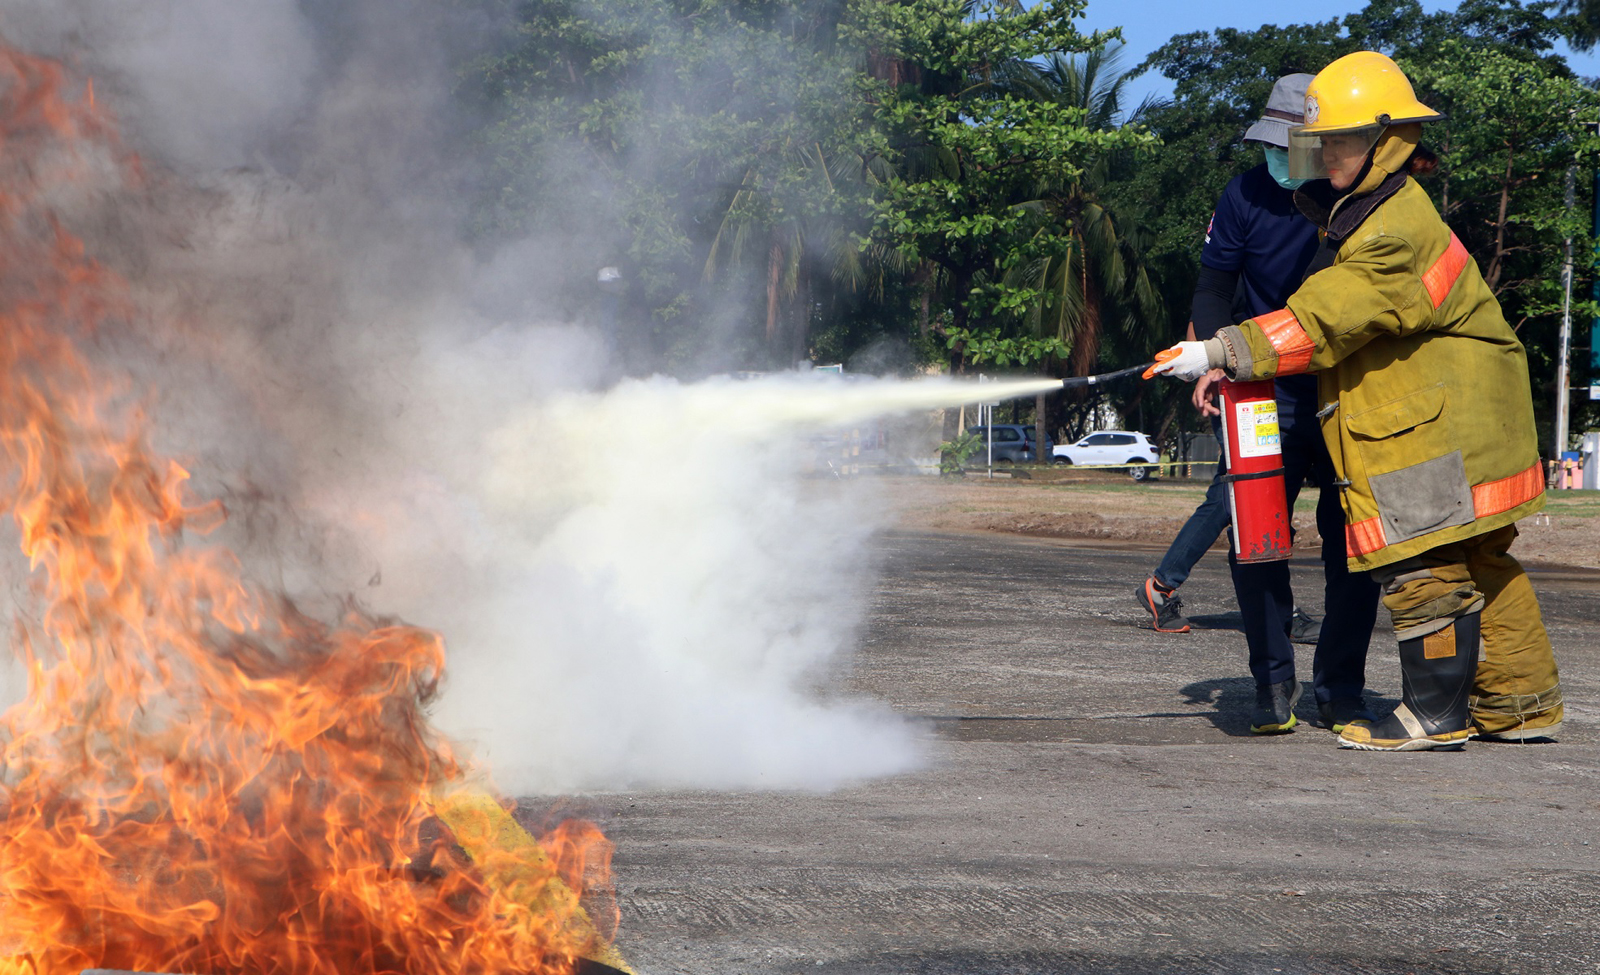 Participants from different locators compete during a Fire Olympics 2023 organized by the Subic Bay Metropolitan Authority (SBMA) Fire Department and the Subic Bay Development Management Corporation (SBDMC) held at the Subic Bay Gateway Park (SBGP) on Thursday, March 09. The activity aims to instill fire suppression readiness among workers in their respective companies.